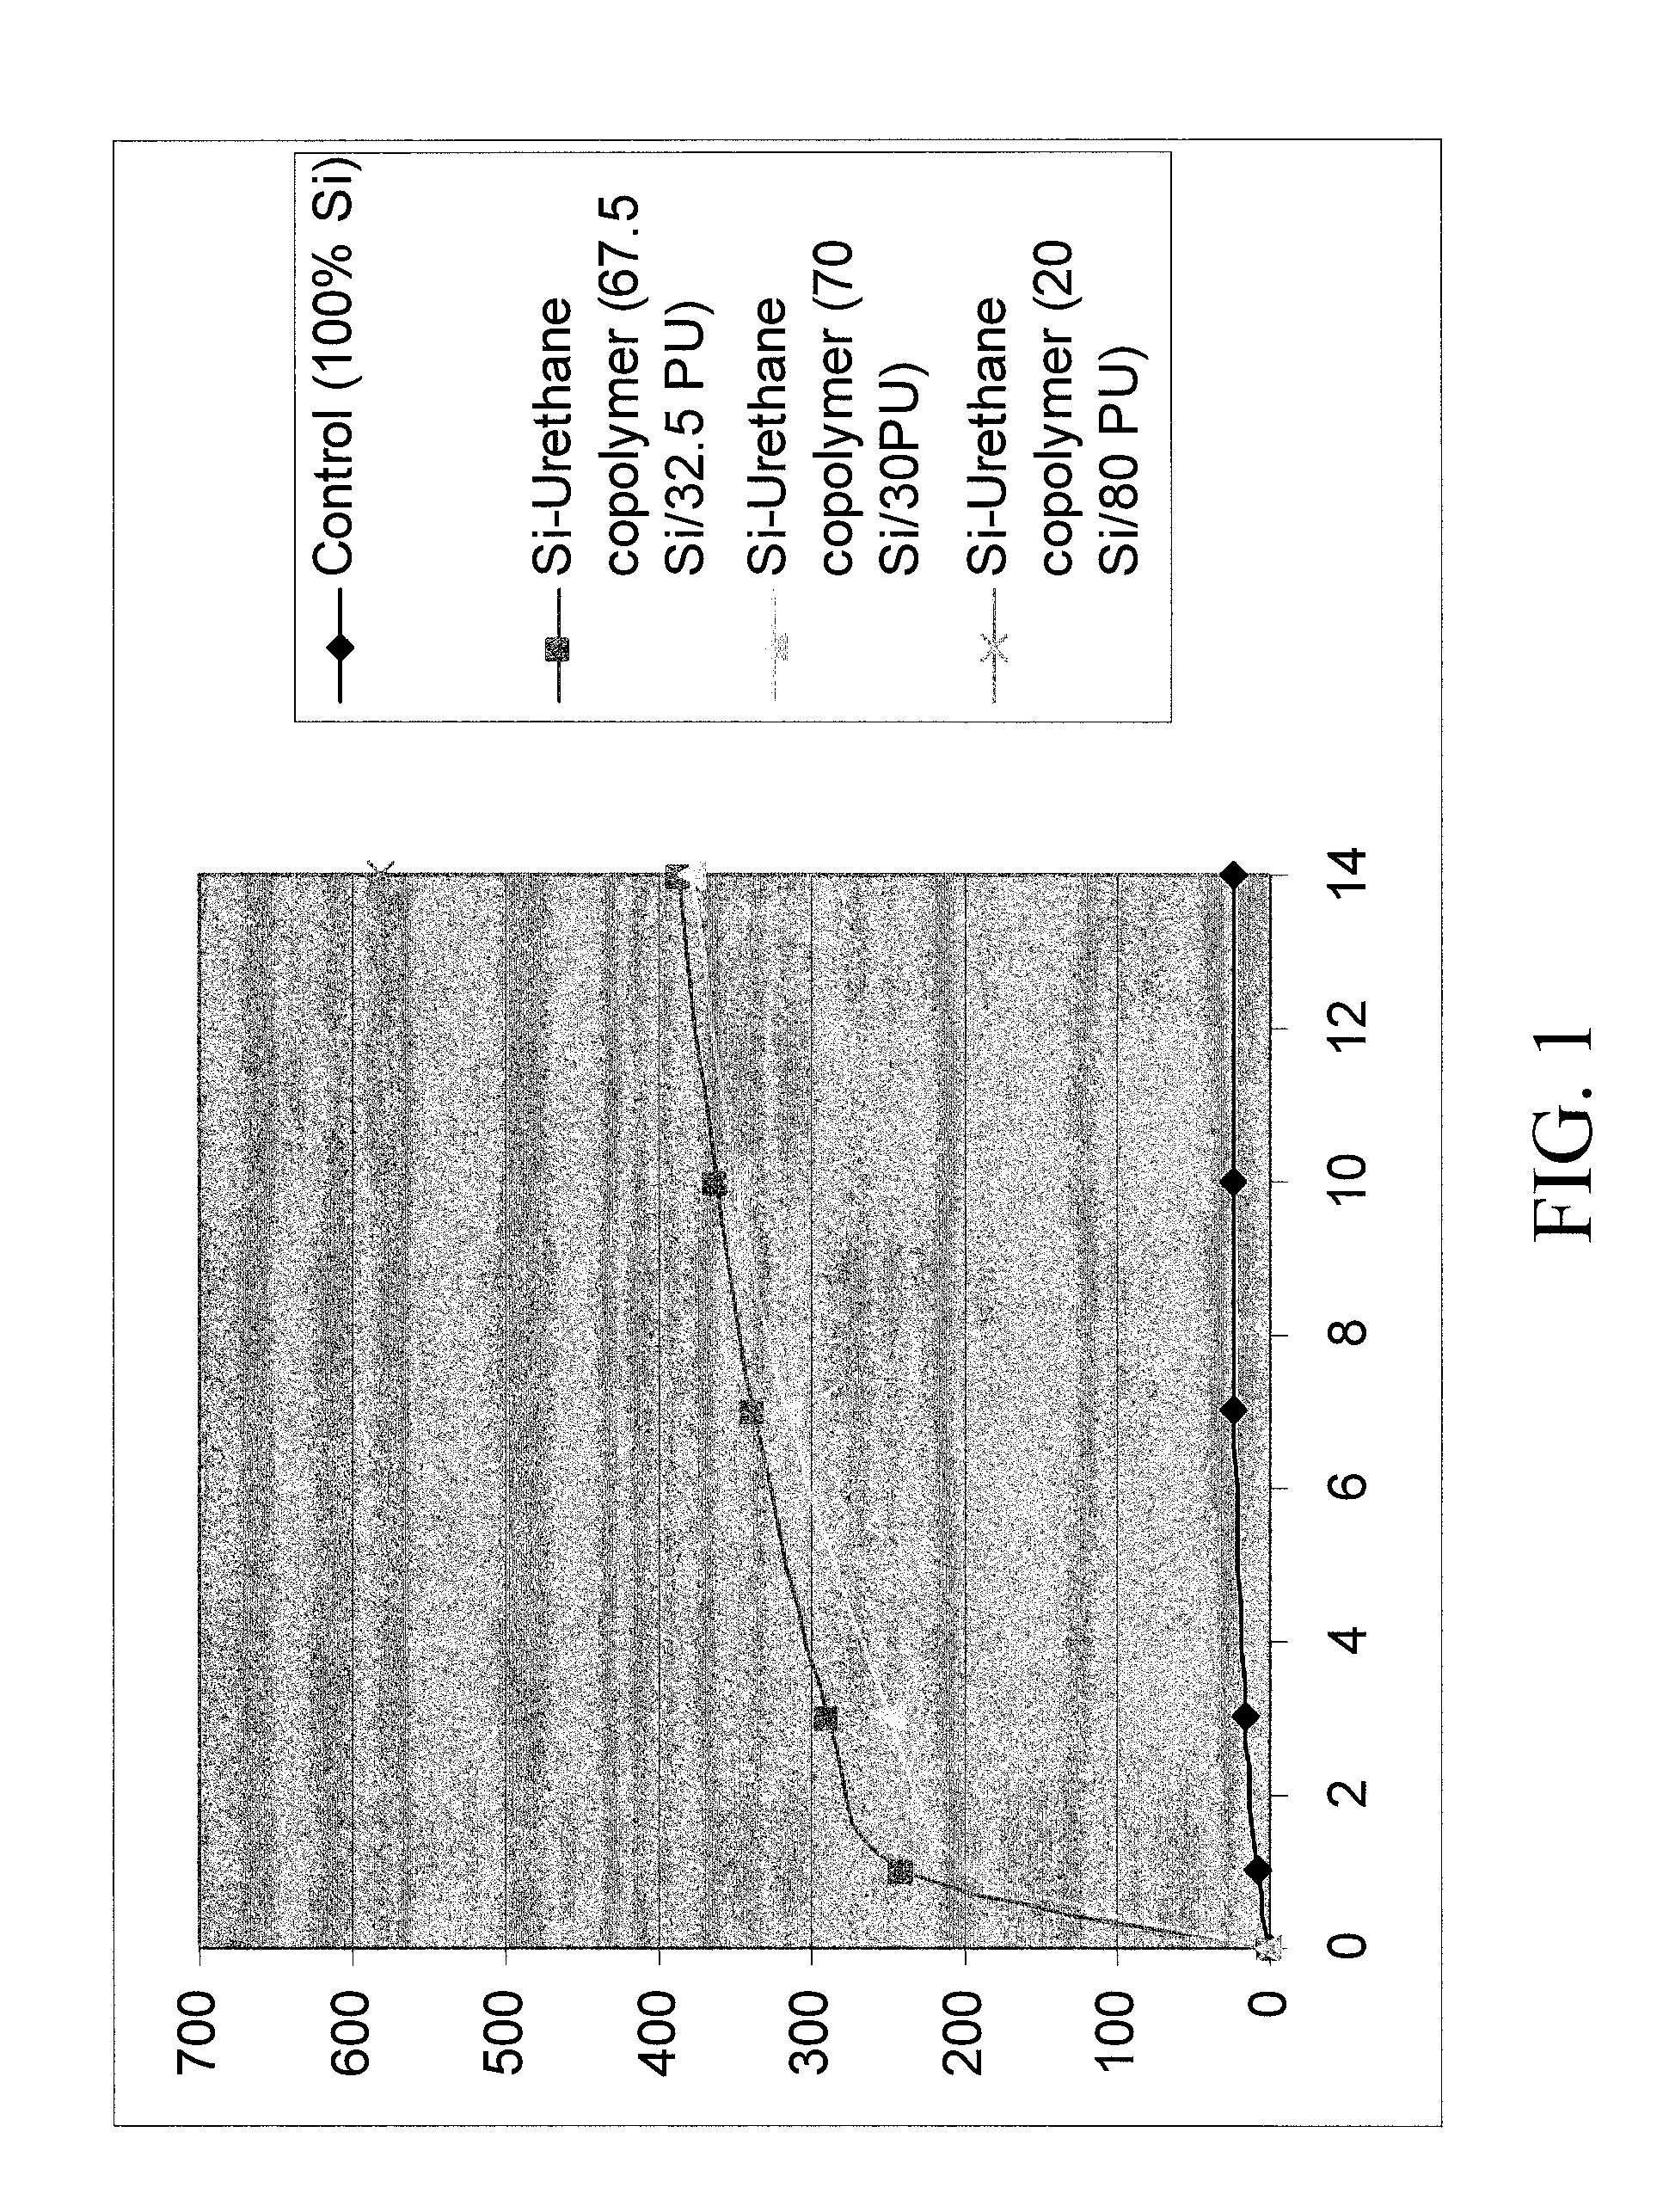 Polymer for Controlling Delivery of Bioactive Agents and Method of Use